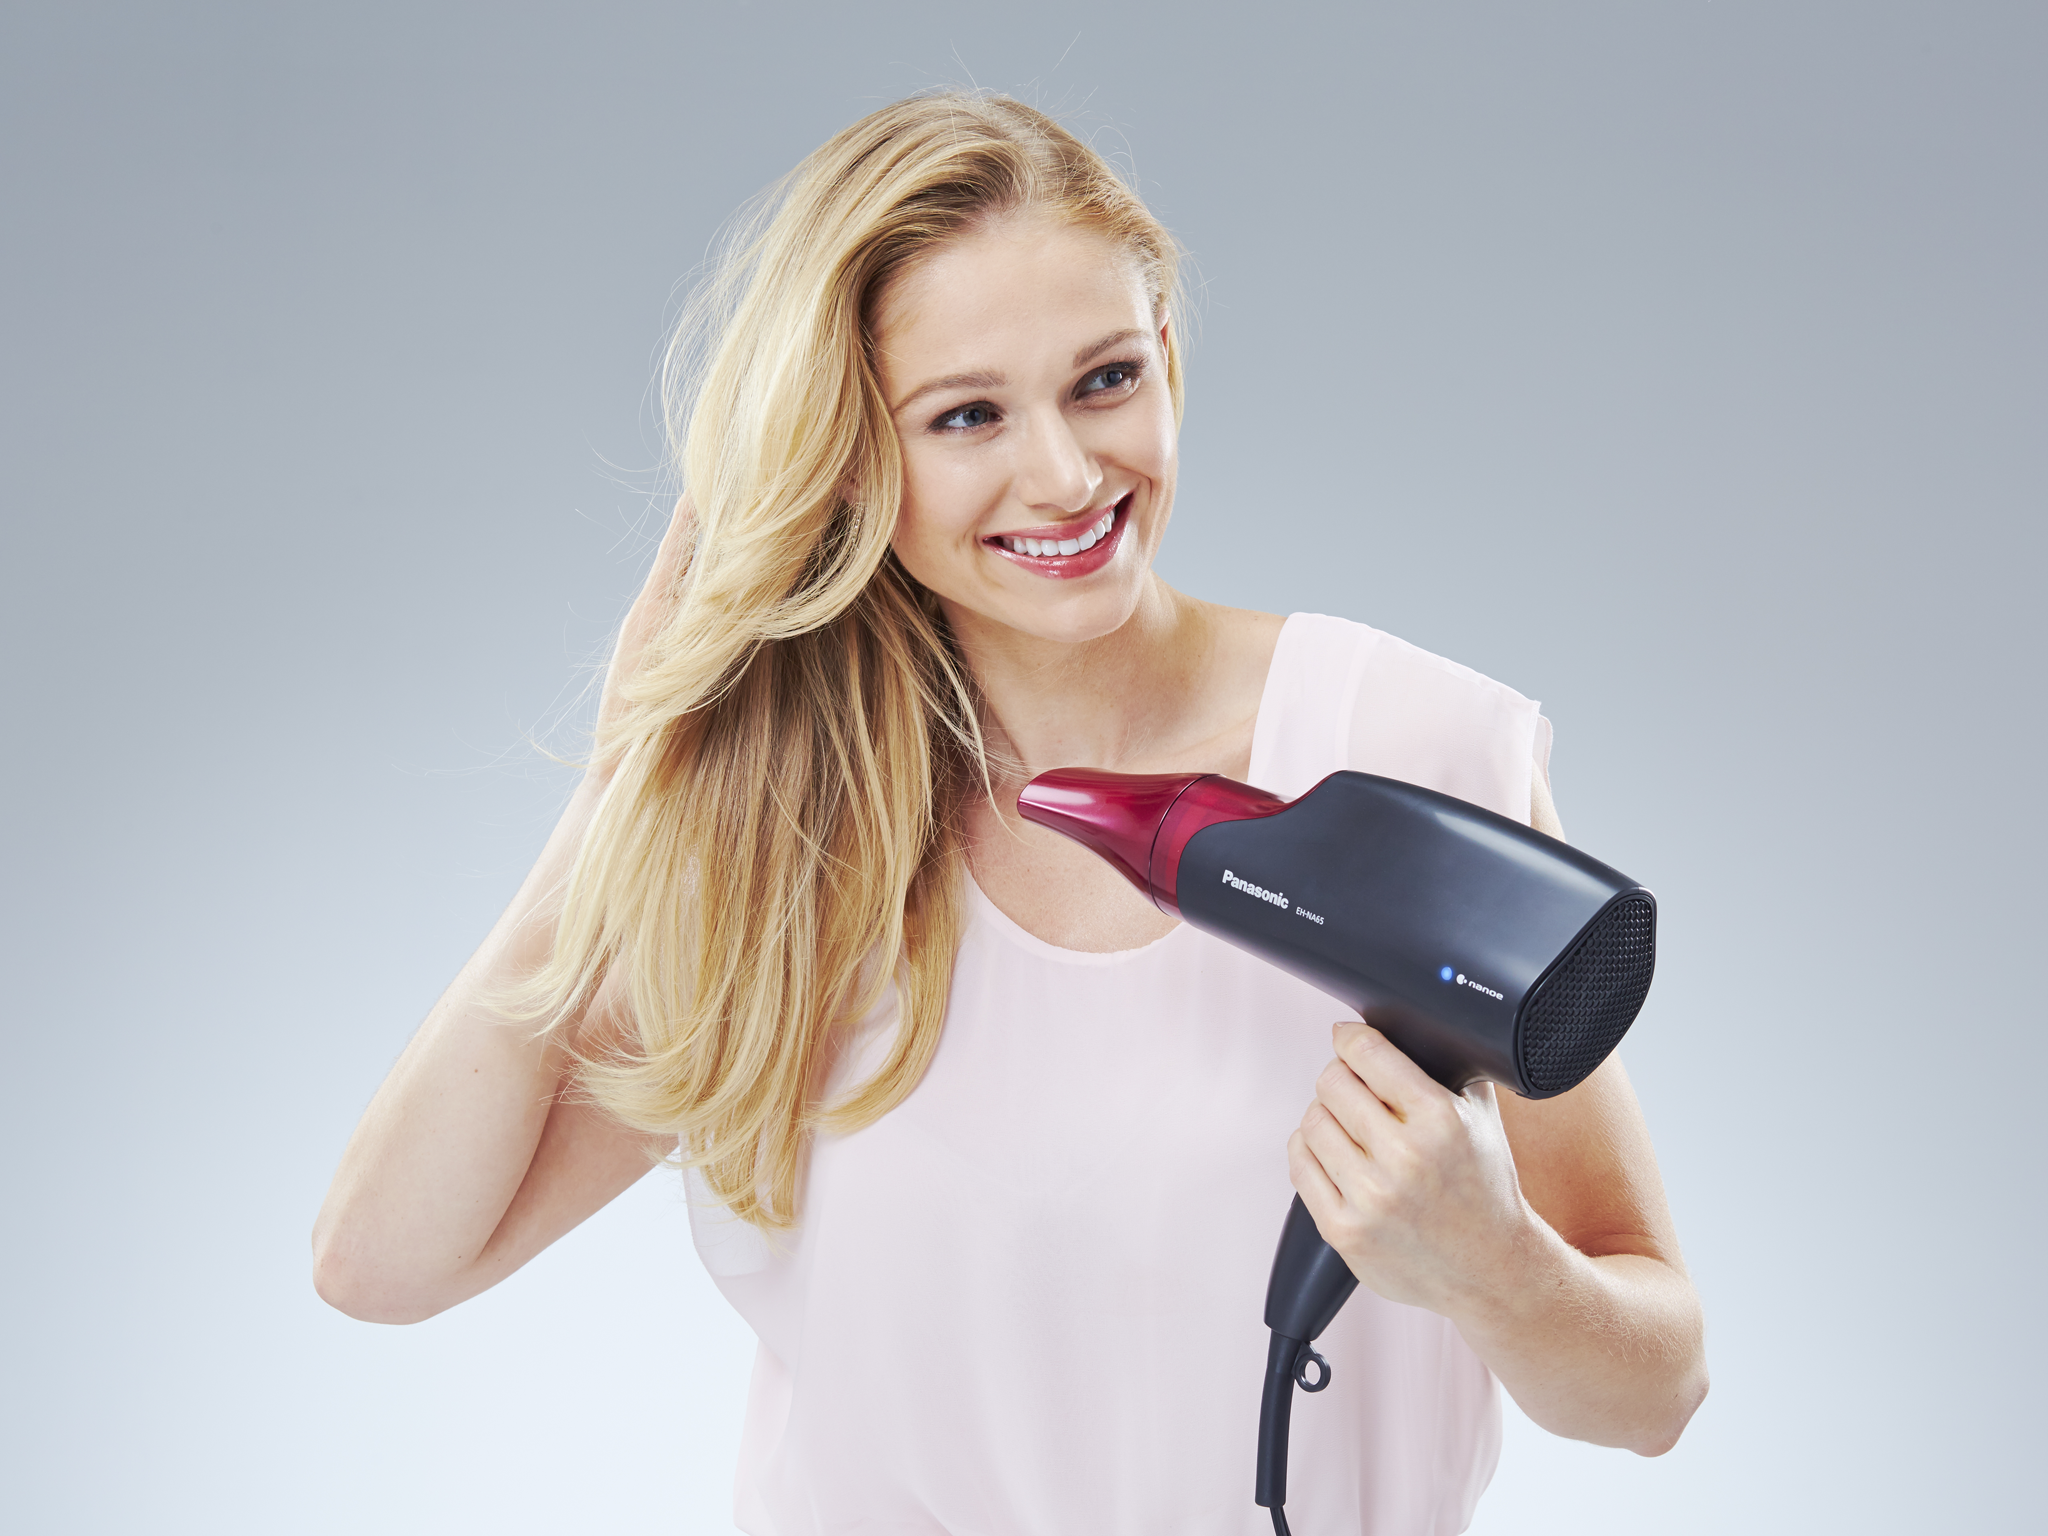 11 Best Hair Dryers The Independent 